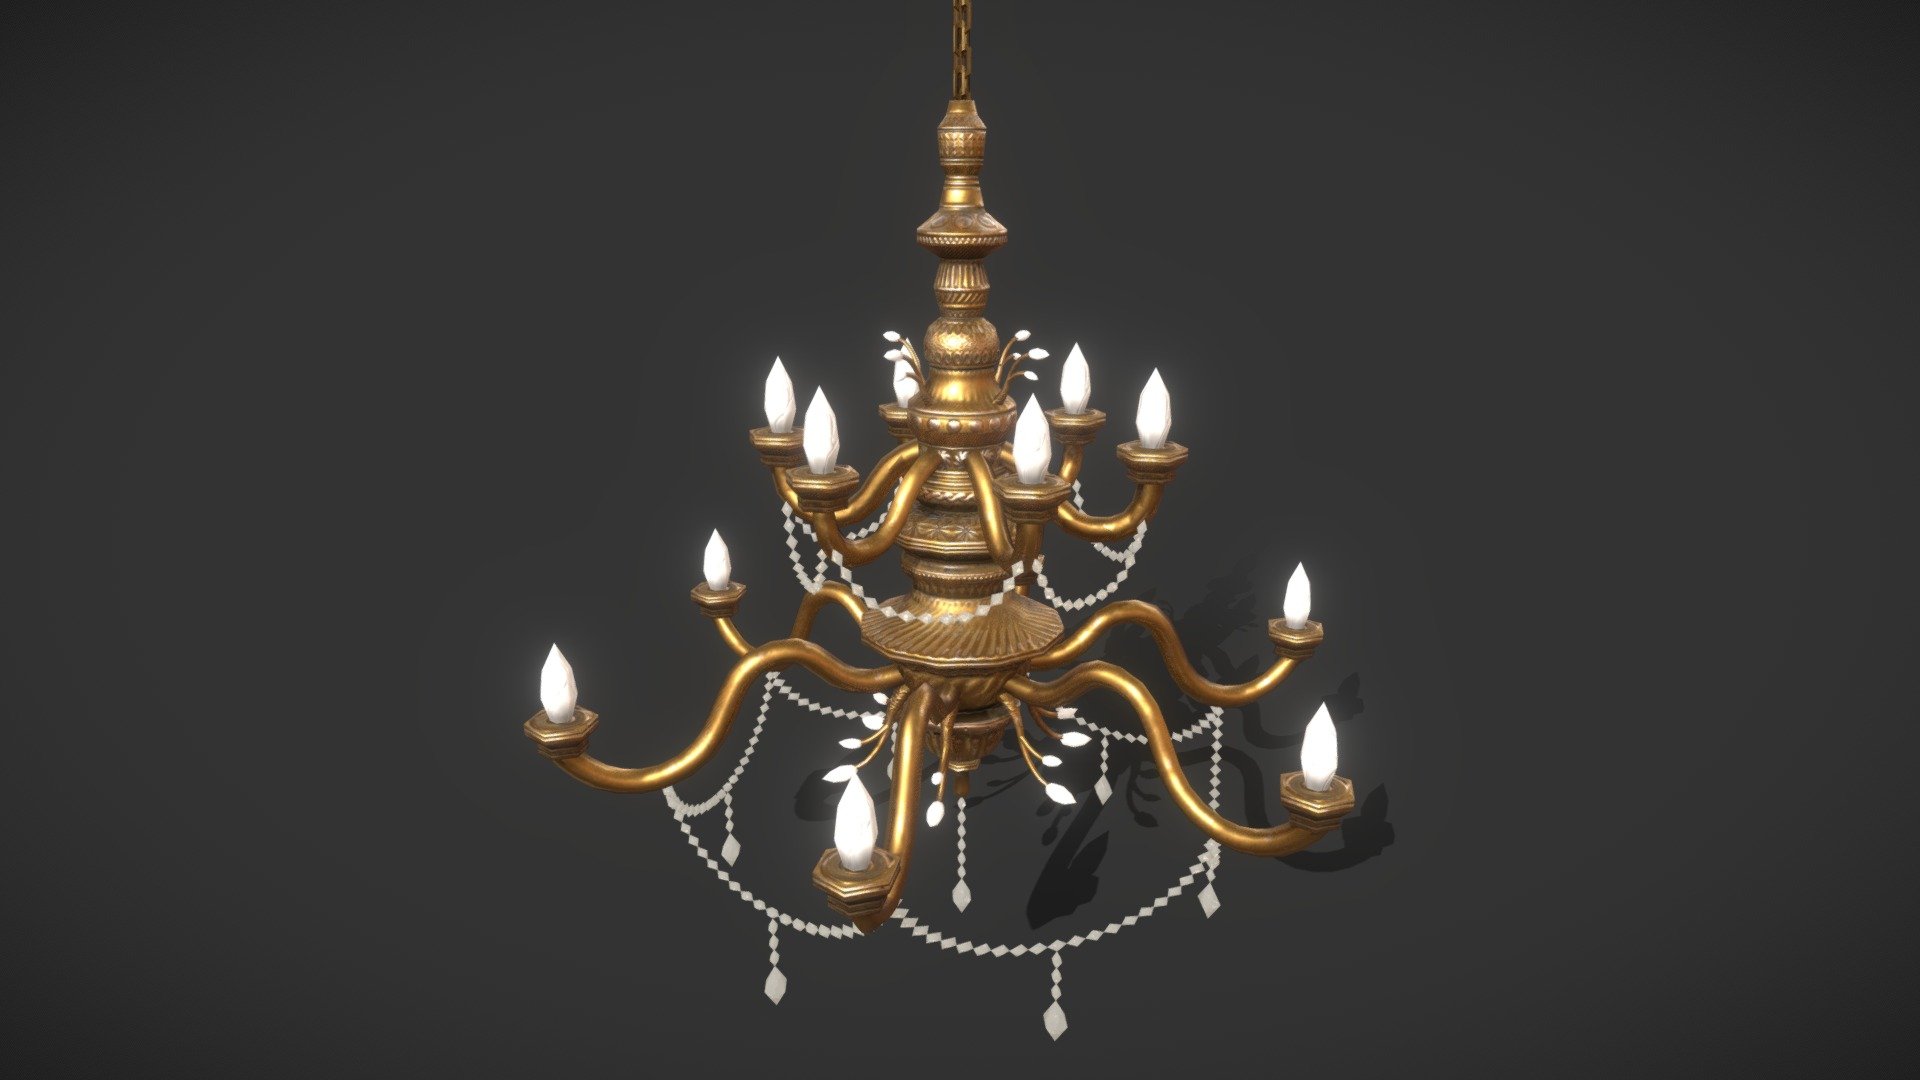 Decorative chandelier light.

Can change material emission properties for different lighting effects. 

Polycount: 7722 Triangles

PNG Texture sizes:

Set 1: Both Chandelier and Chain 2048 x 2048

(Include Albedo, Normal, Specular, Emission and AO)

Set 2: Chandelier 1024x1024 Albedo

512x512 Normal, Specular, Emission and AO

Chain 256x256 (Include Albedo, Normal, Specular and AO) - Decor Chandelier - Buy Royalty Free 3D model by Experience Lab Art (@Experience_Lab_Art) 3d model